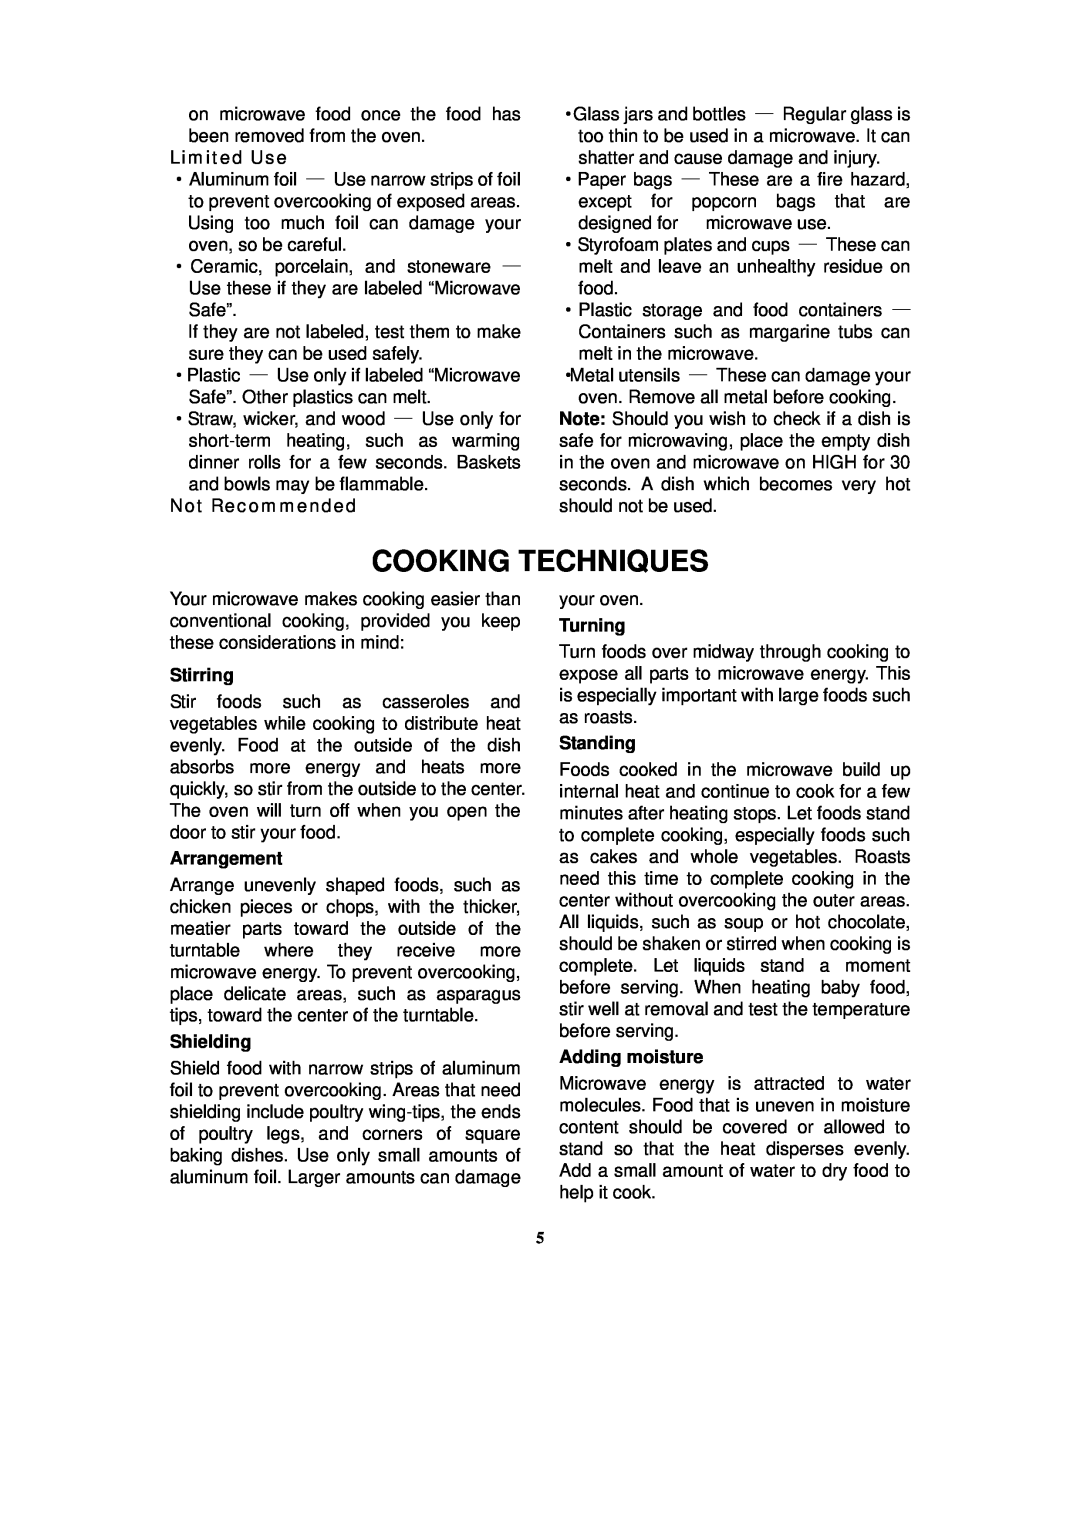 RCA RMW788 warranty Cooking Techniques, Limited Use, Not Recommended, Stirring, Arrangement, Shielding, Turning, Standing 